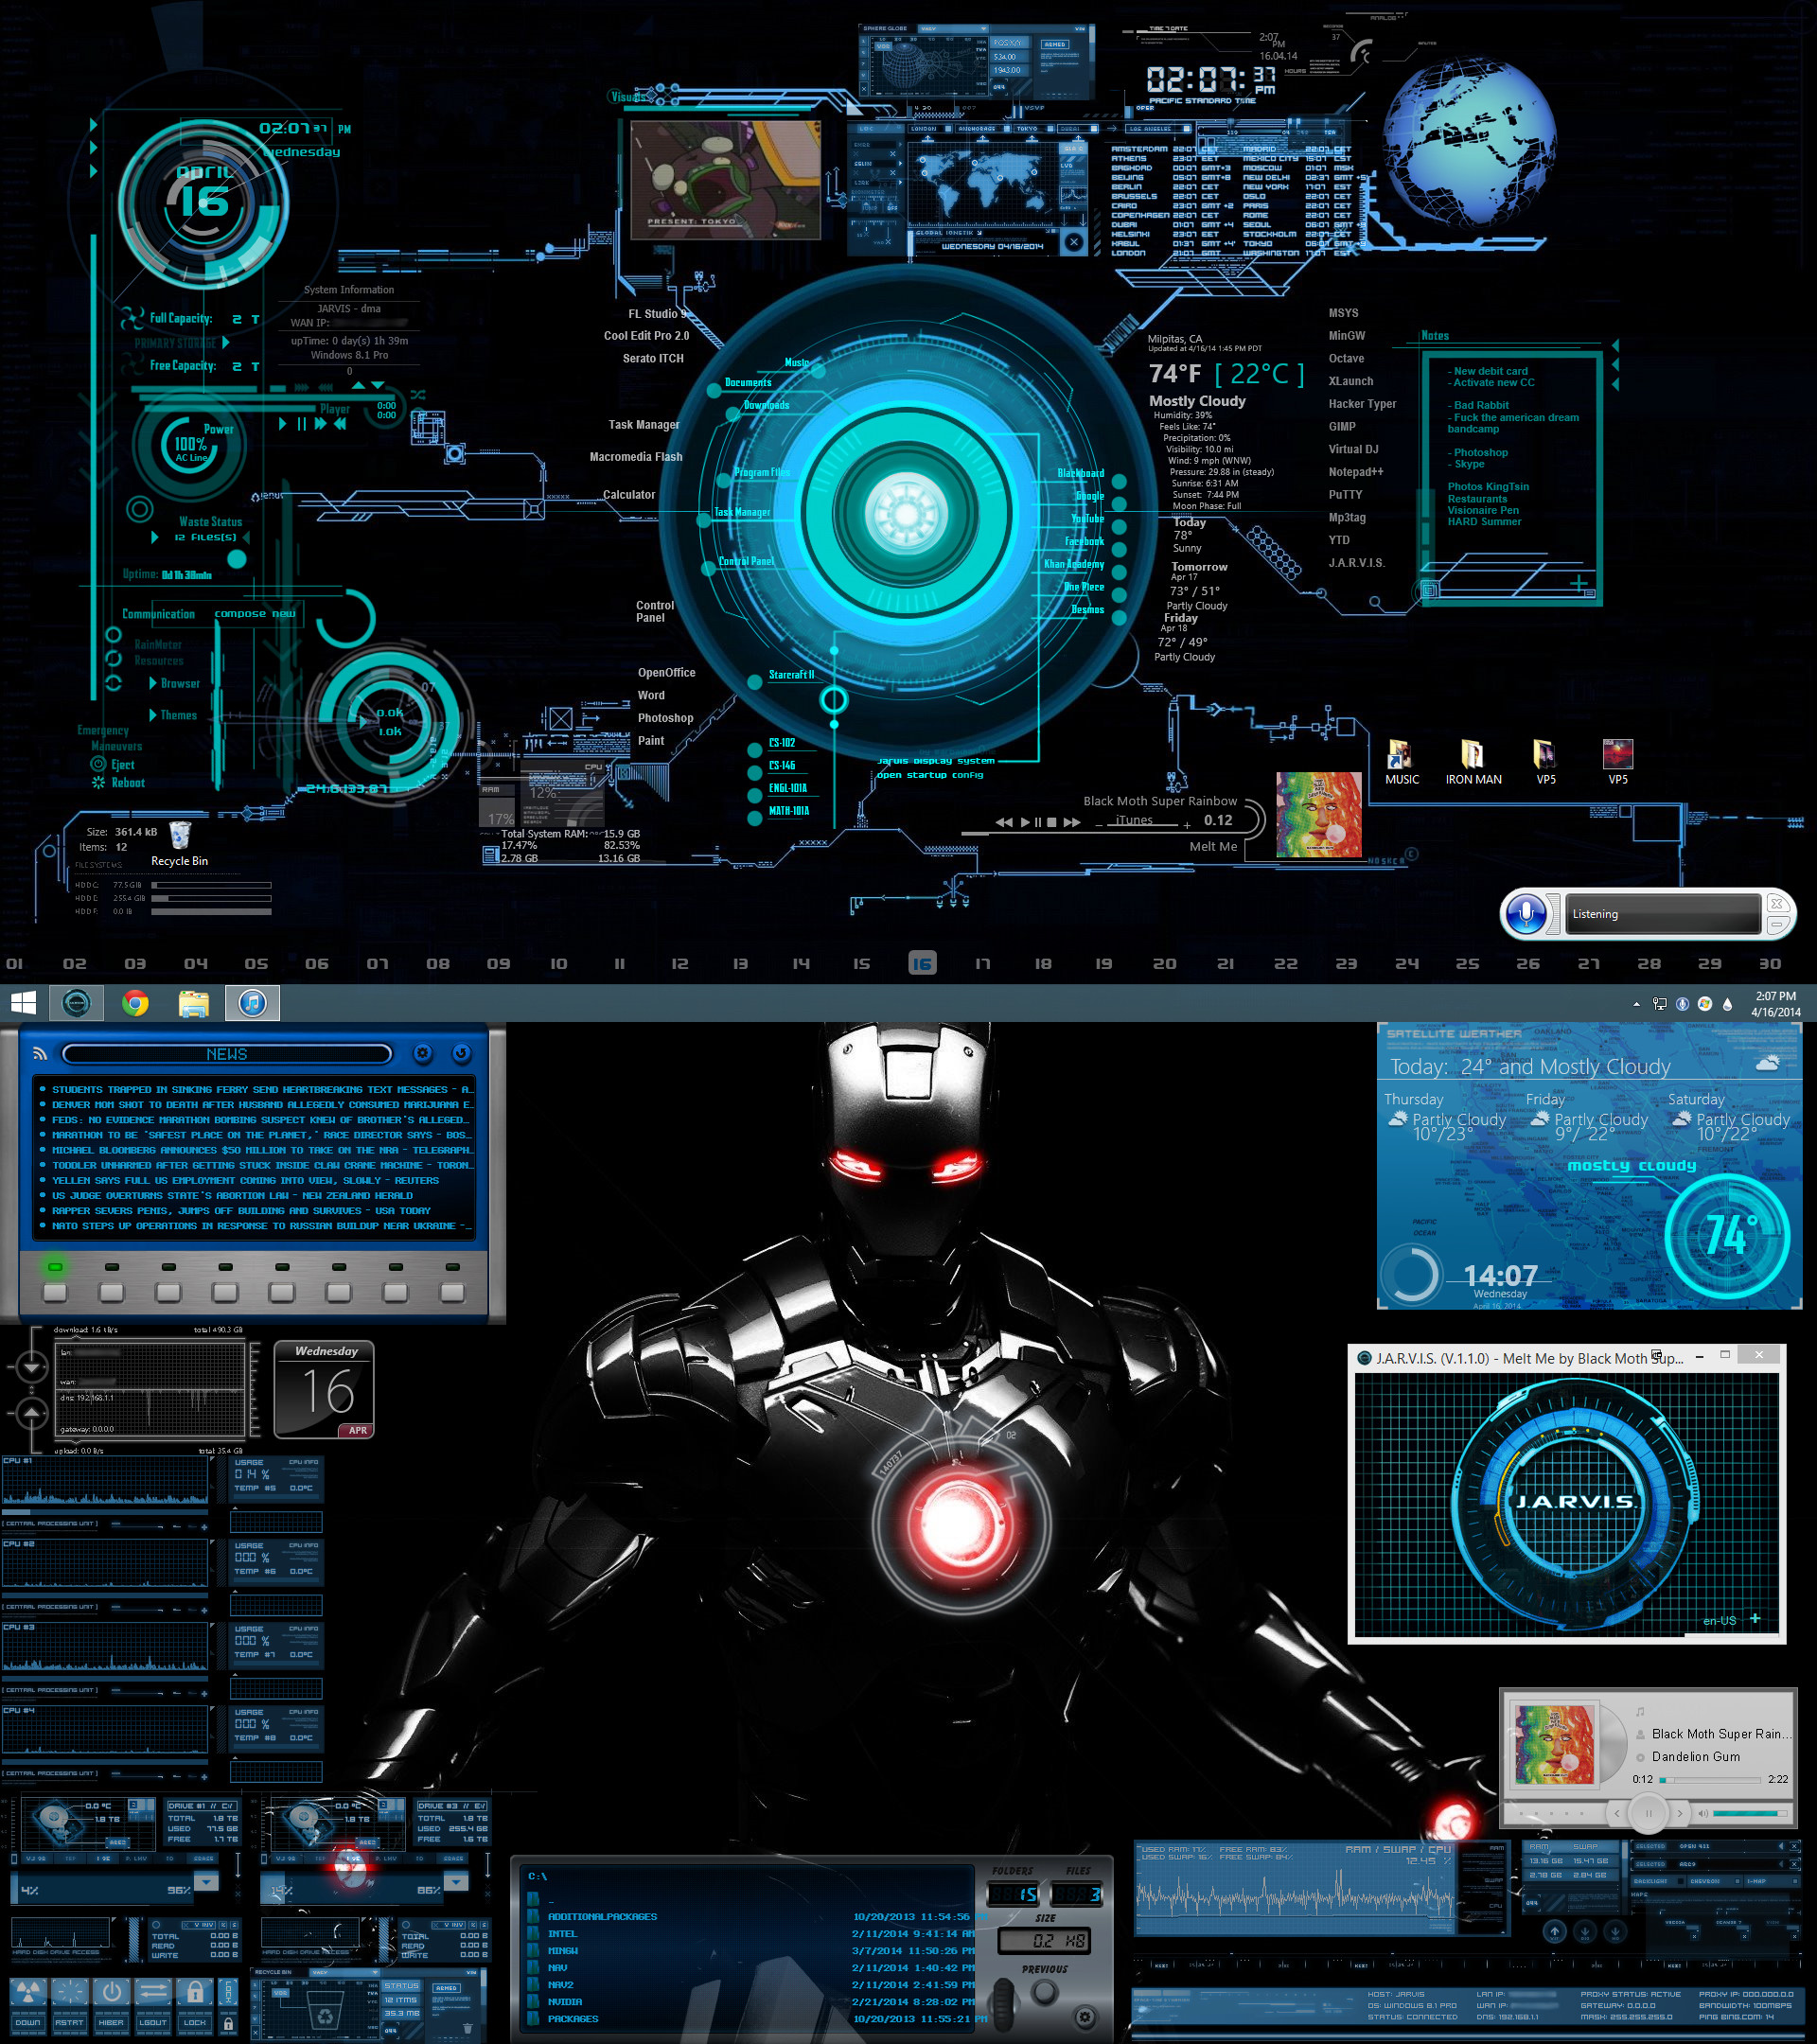 Second Screenshot: Desktop with just Rainmeter, iTunes, and J.A.R.V.I.S.  running.